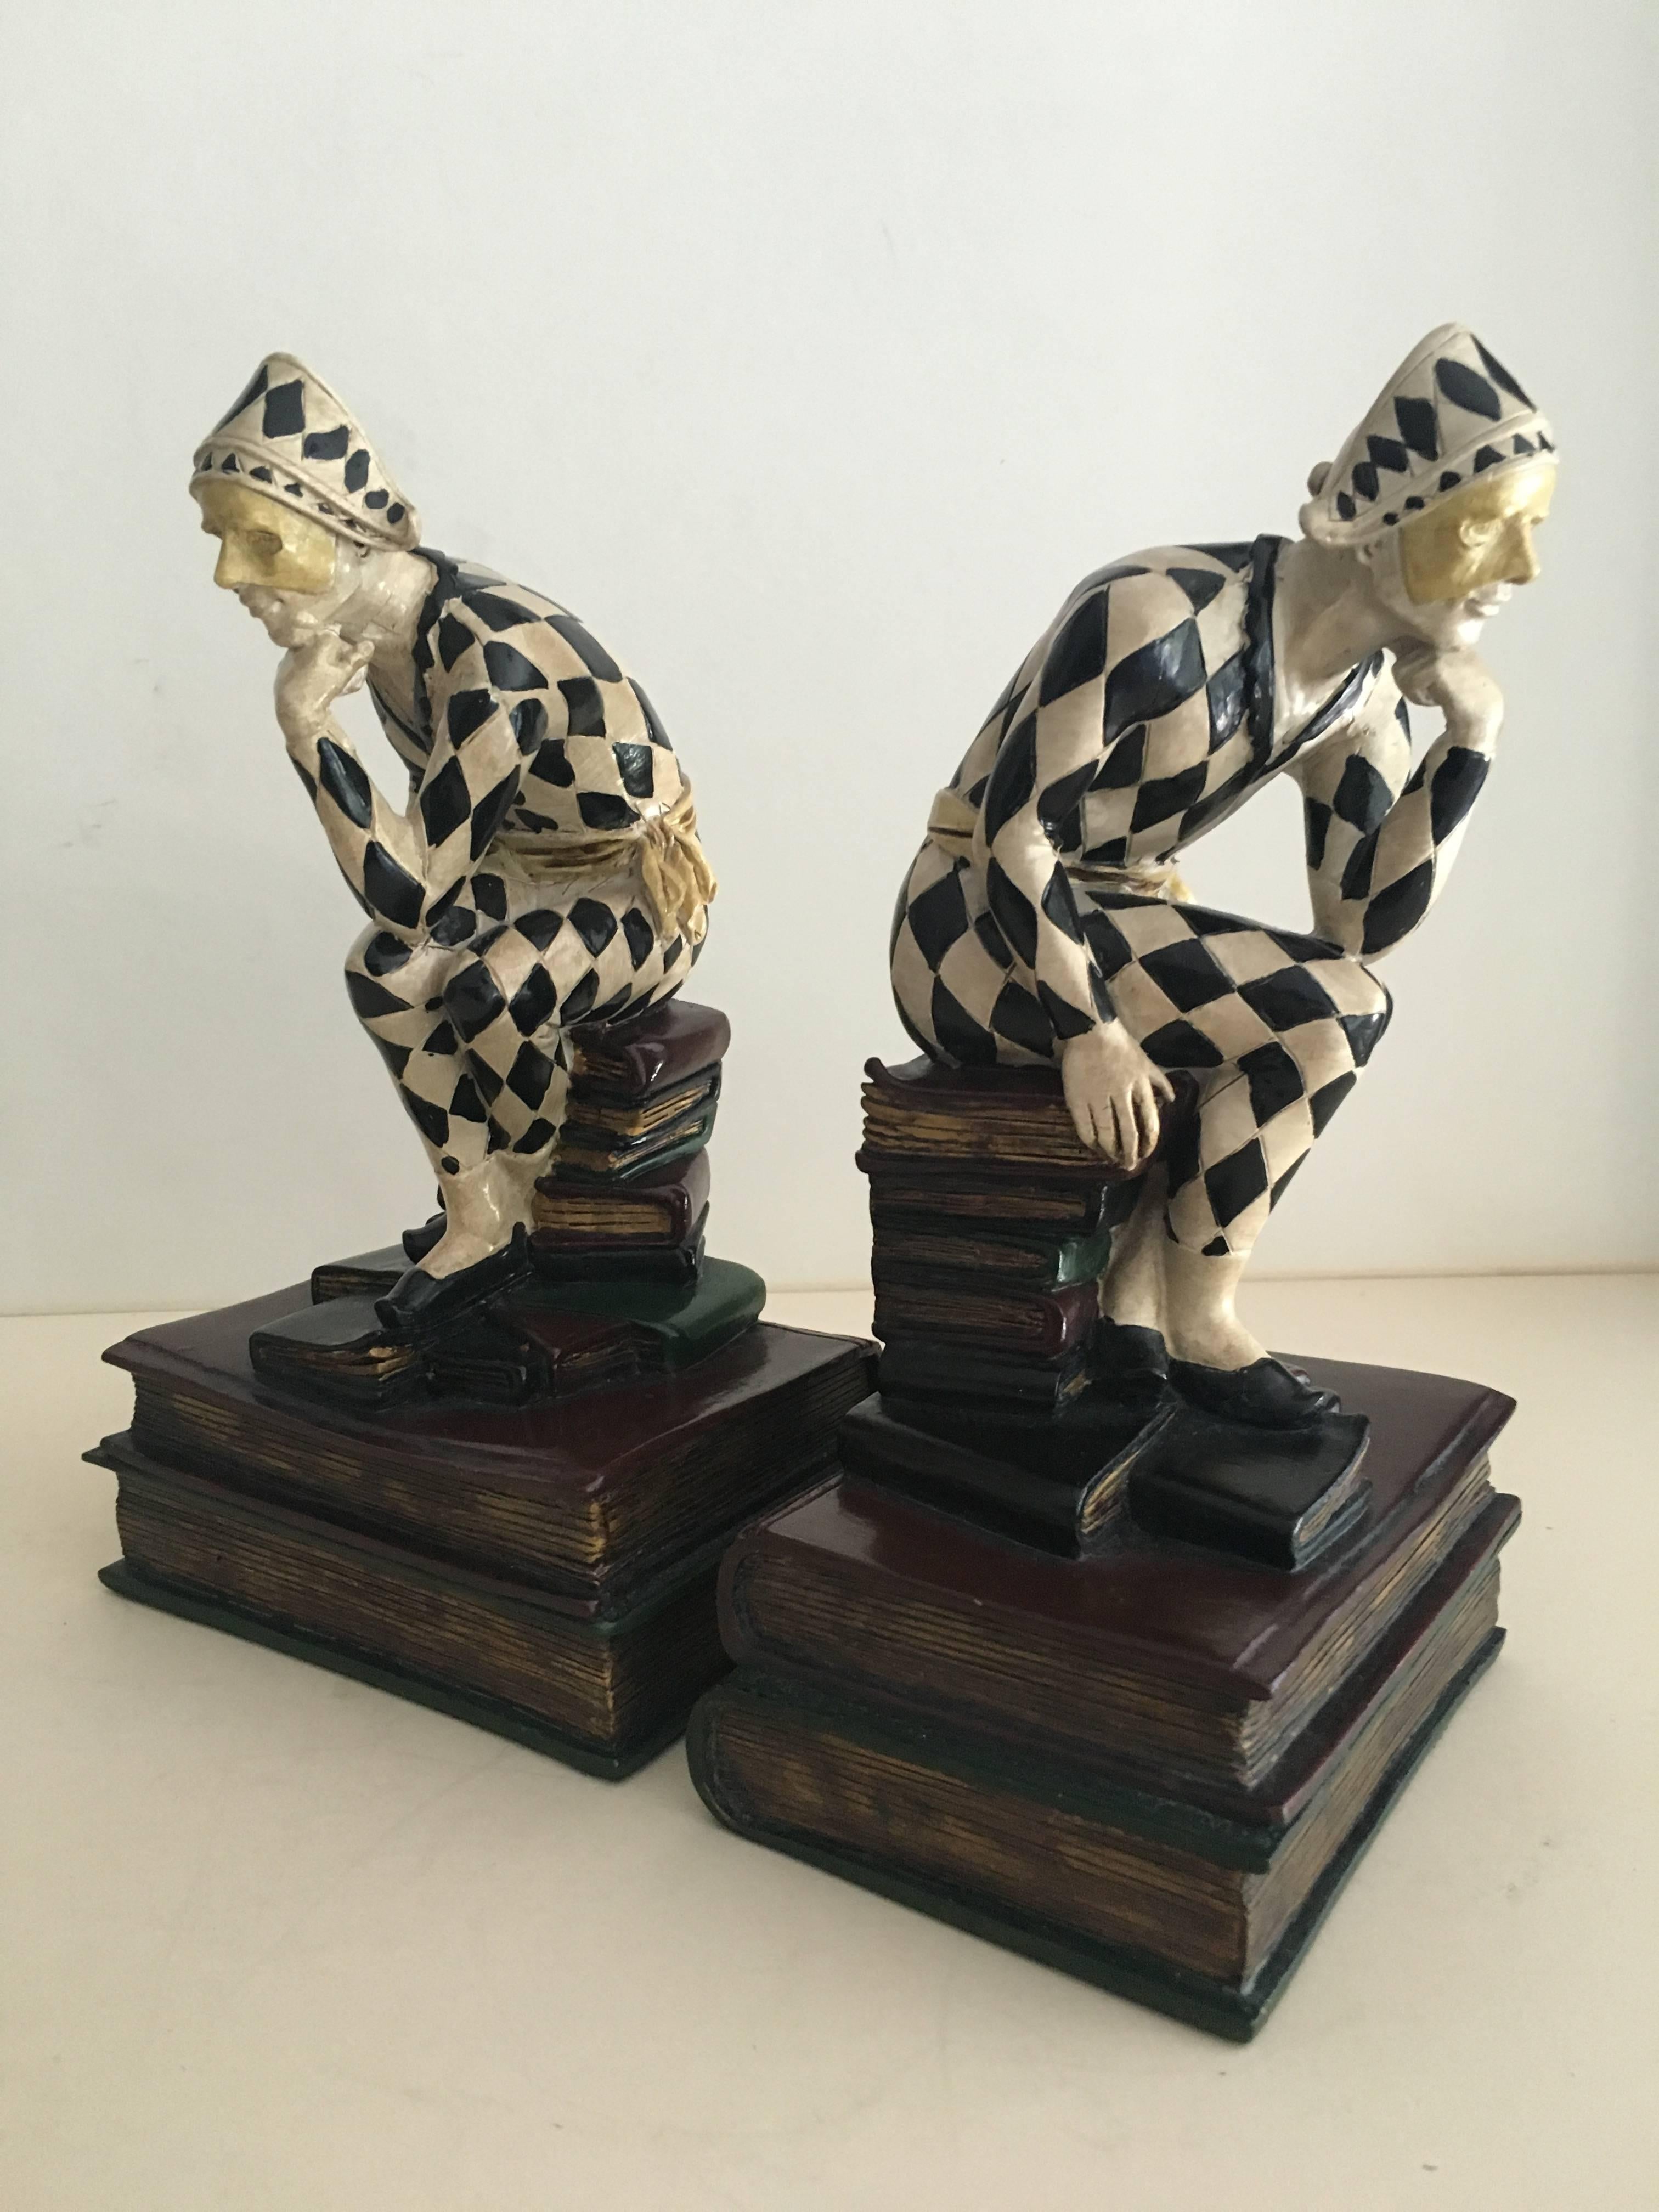 Deco in style, Harlequin bookends with great detailing perfect for the office, den or library and a great addition to the sophisticated childs room!